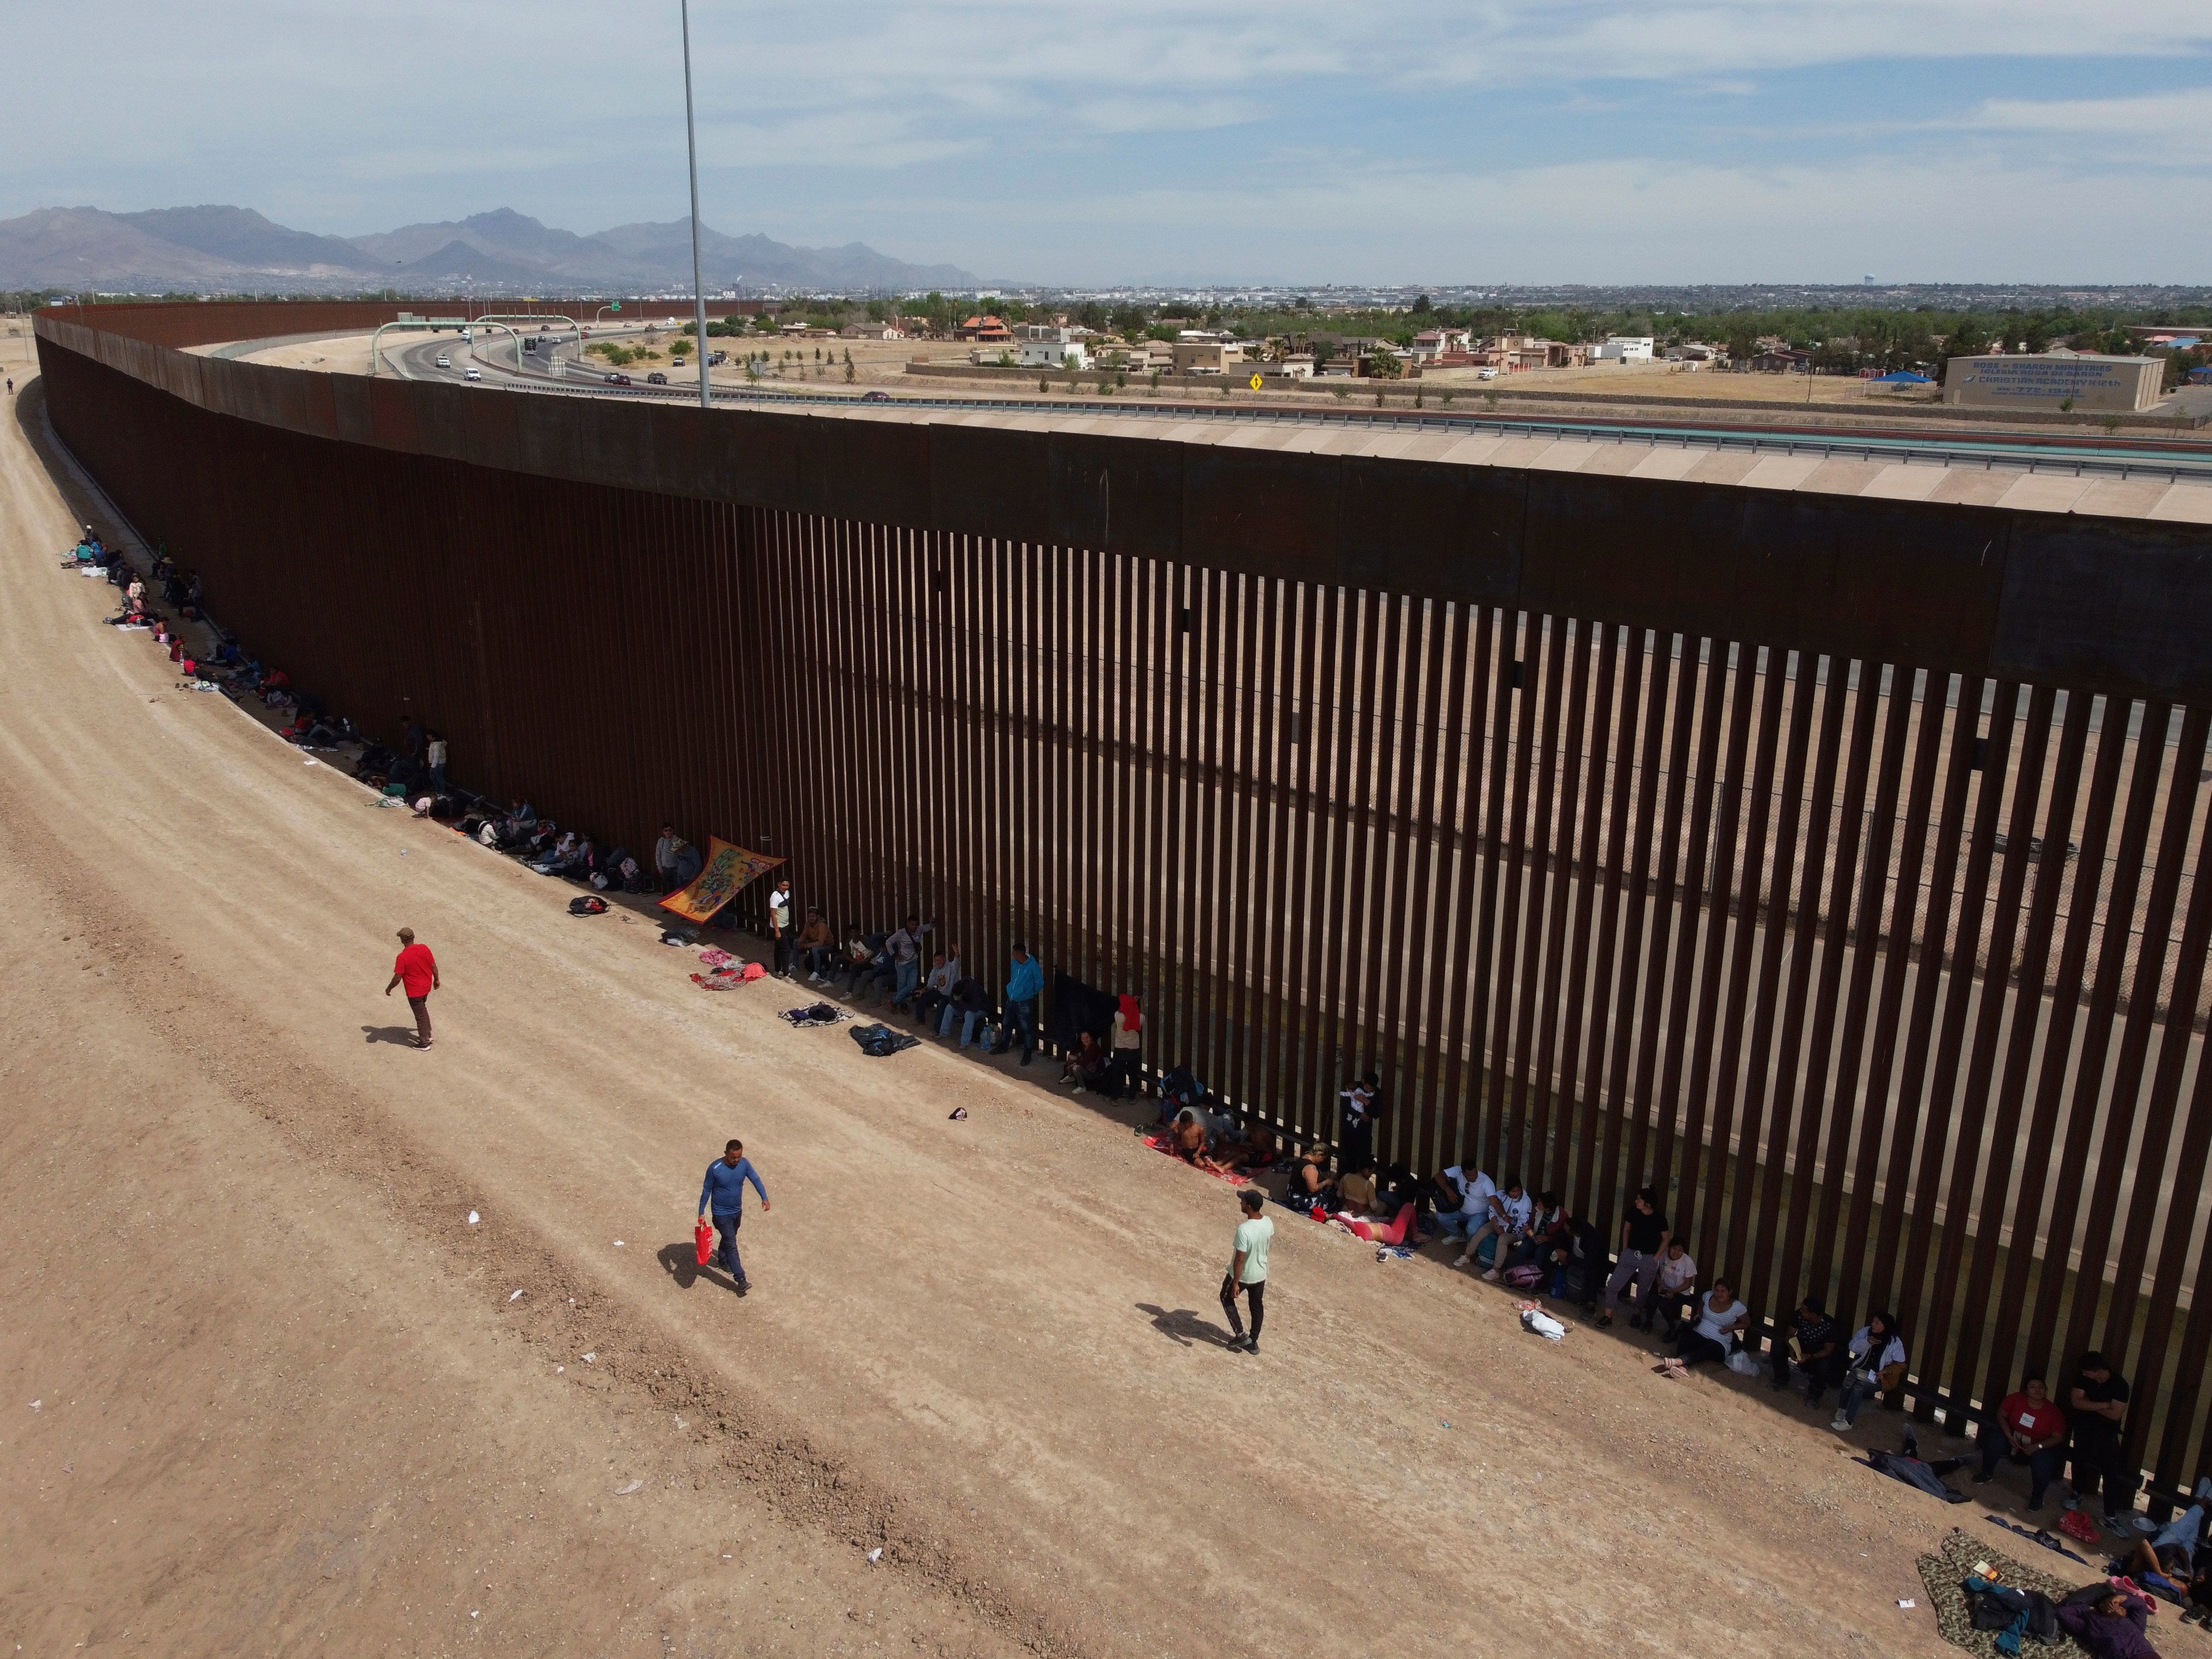 Immigration Law and Policy Expert on Anticipated Migrant Surge at Southern Border as Title 42 Expires